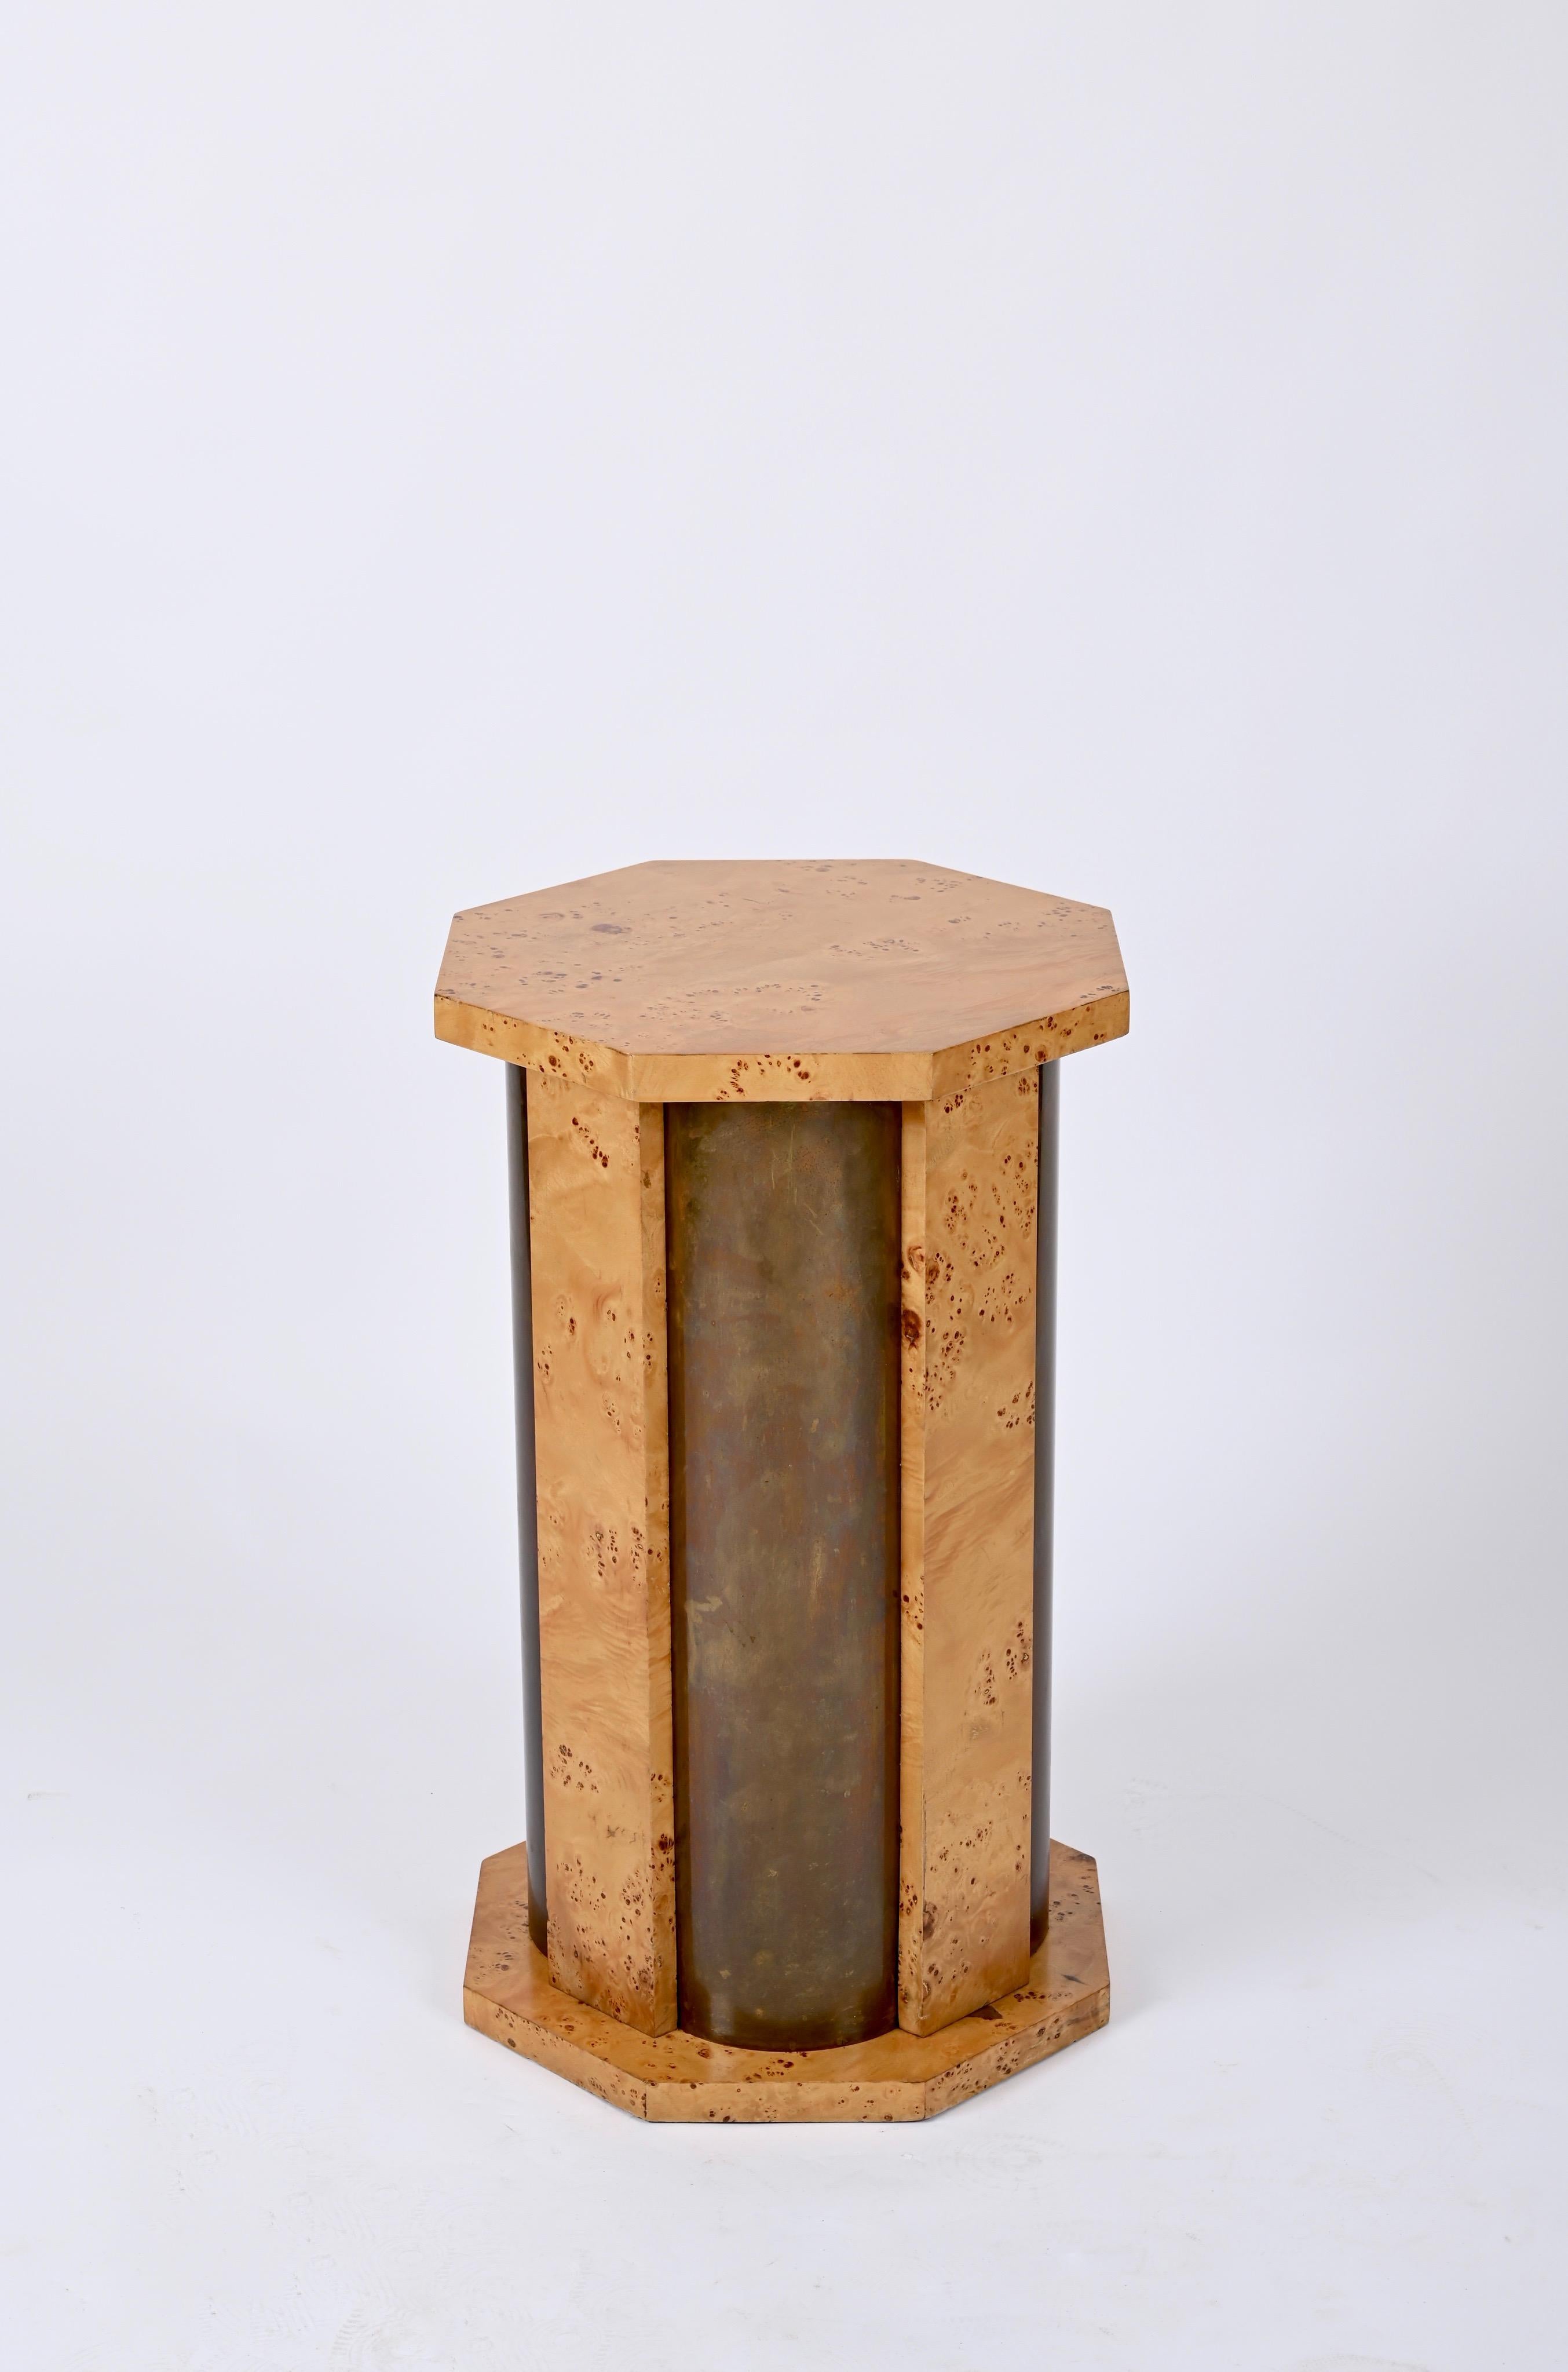 Tommaso Barbi Octagonal Table Pedestal in Burl Wood and Brass, Italy, 1970 For Sale 4